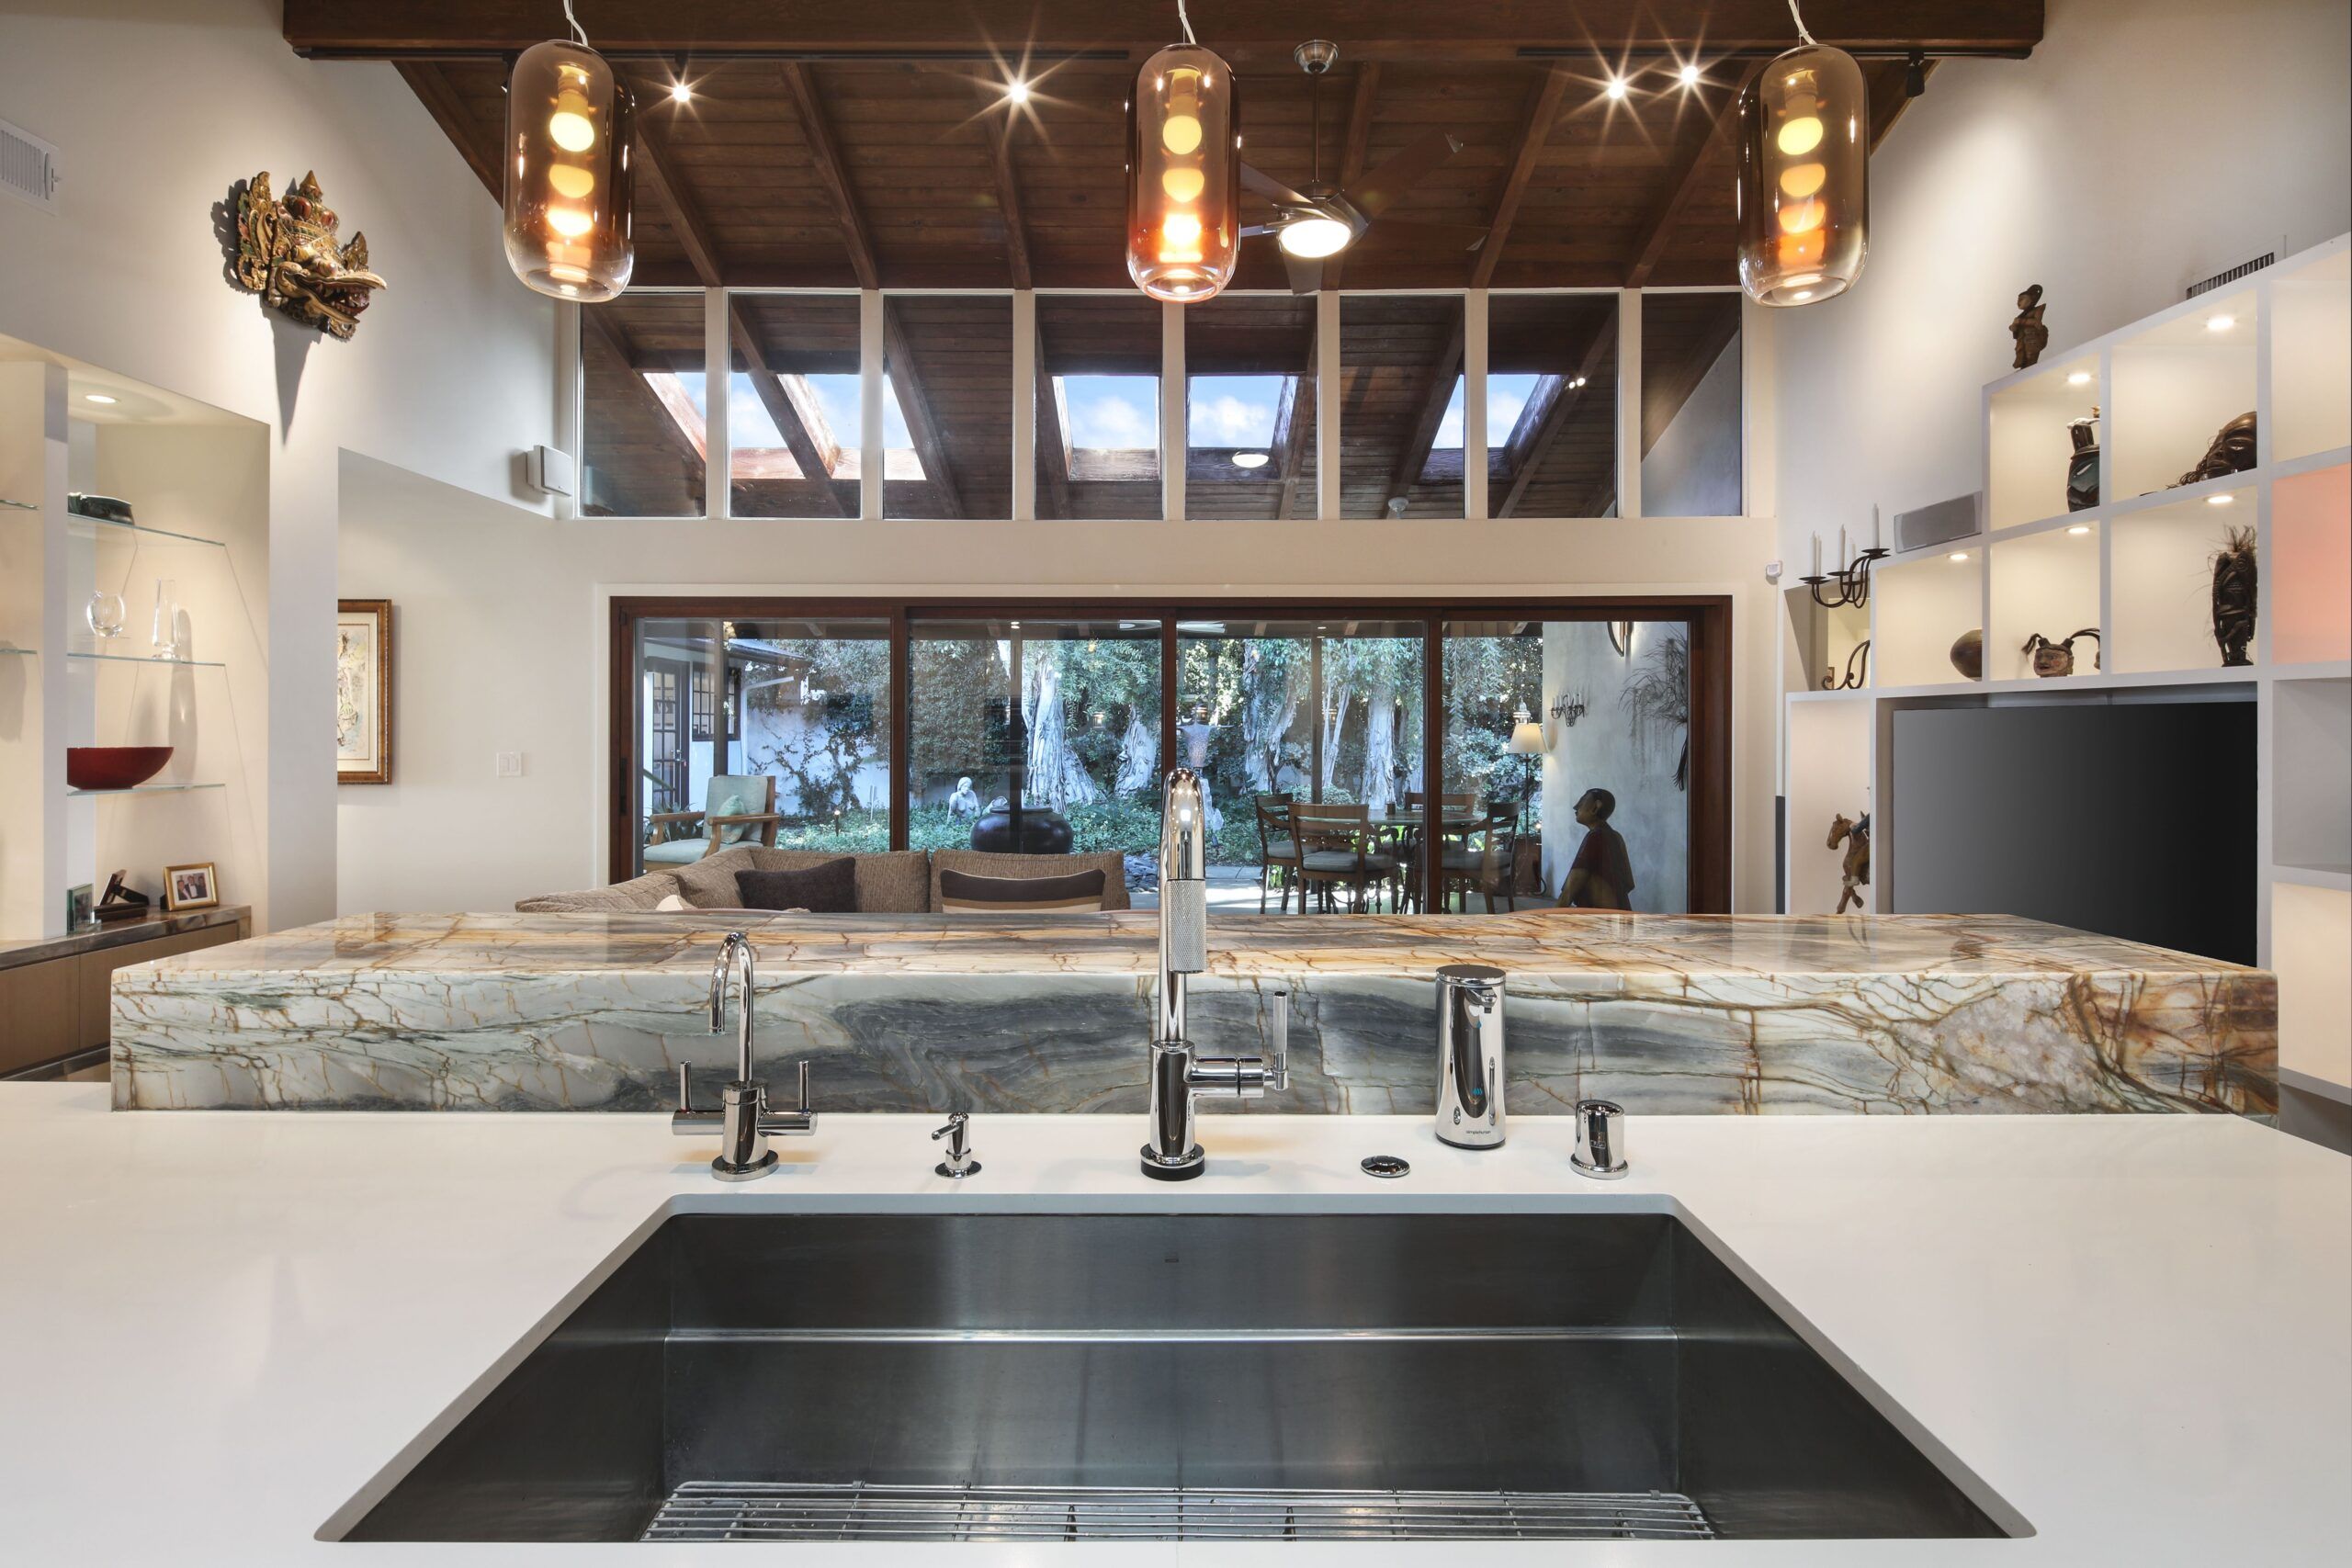 Kitchen with Picasso stone looking out across great room to the outdoor space | River Lane Project | Design Trends in California Architecture Projects | Dean Larkin Design